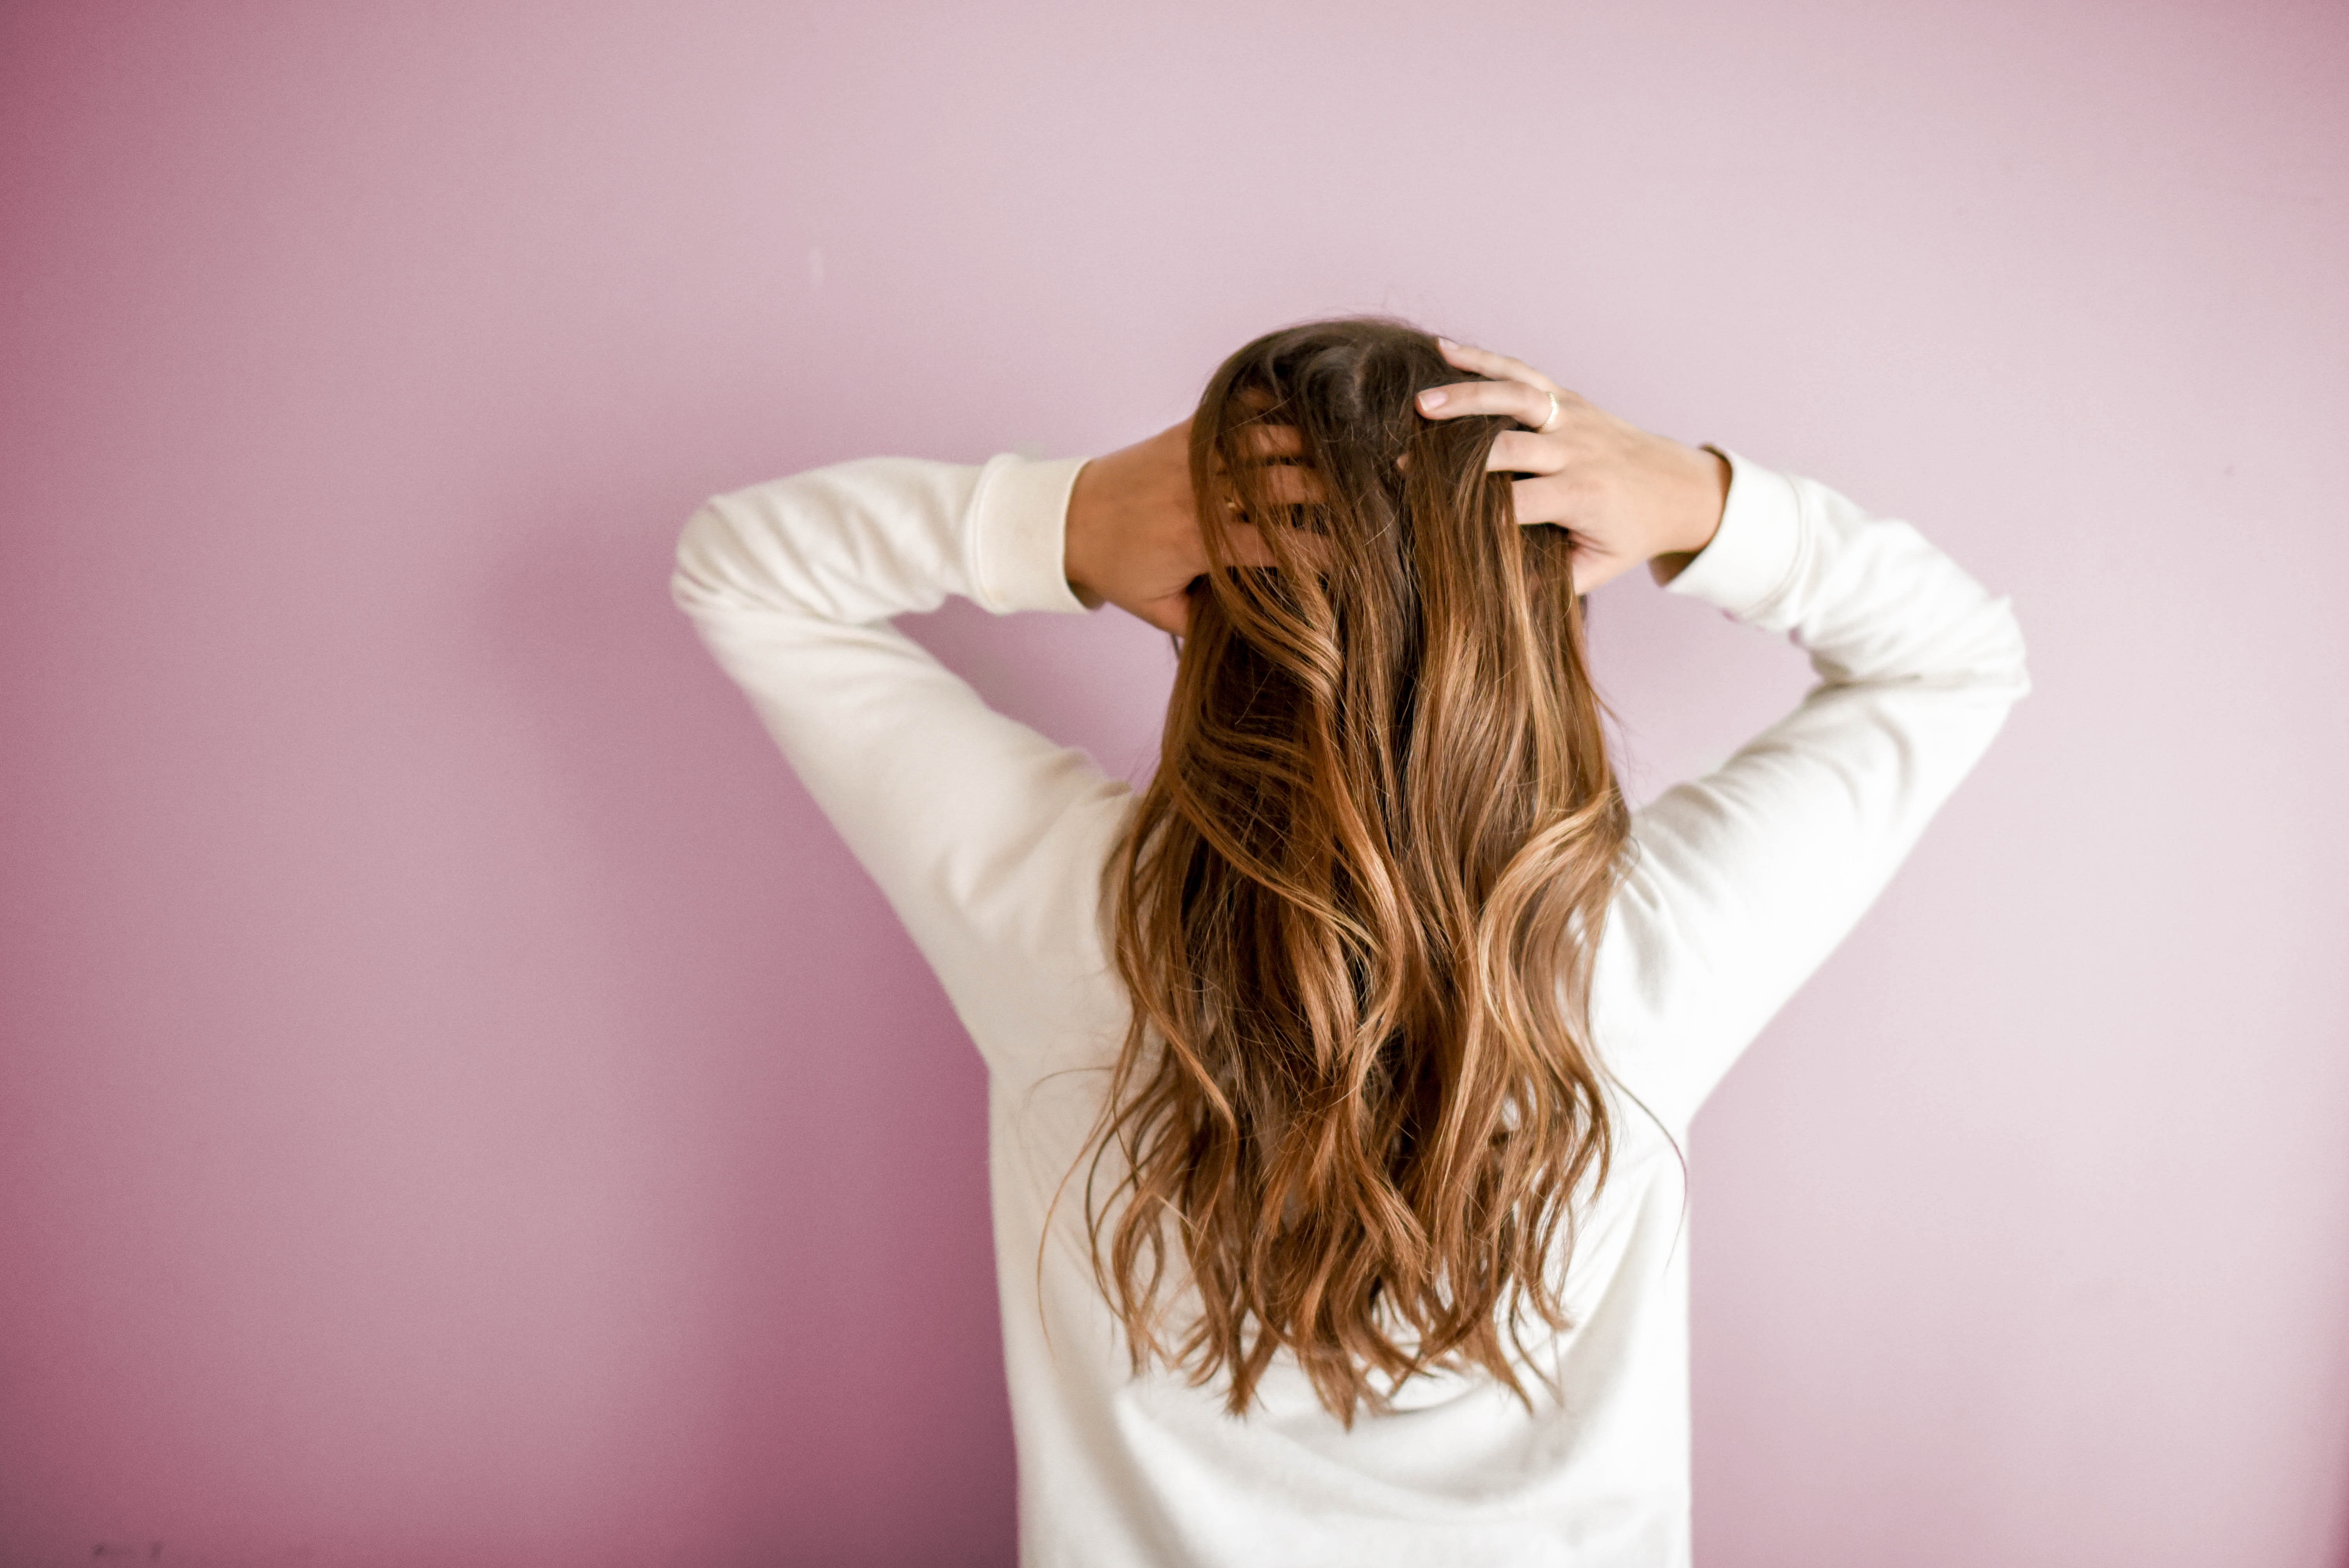 Why 50% spend less than 15 minutes per day on their hair…